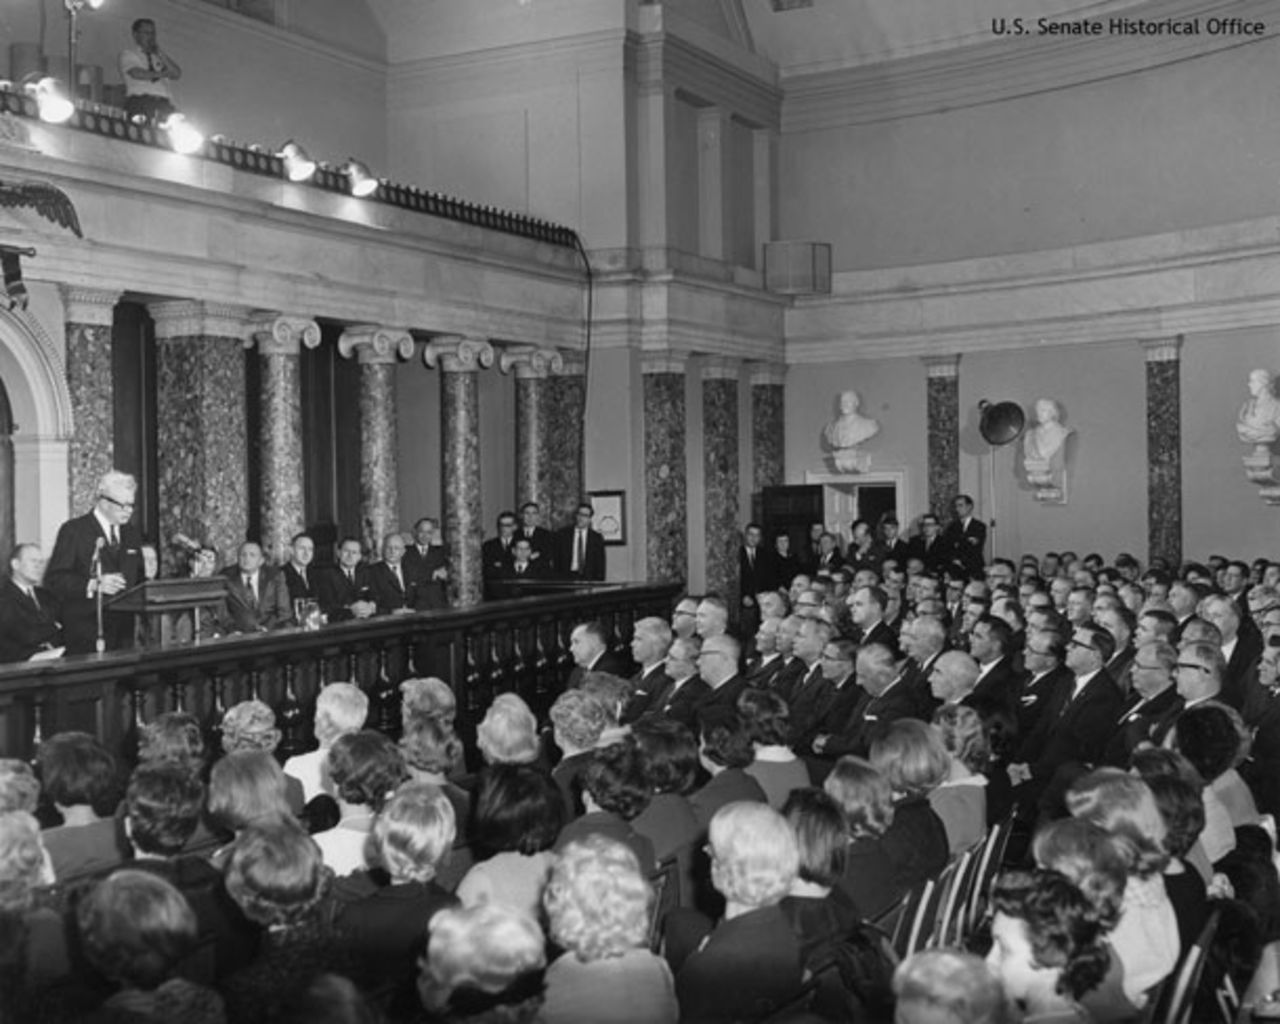 In this 1966 photo, Senate Republican Leader Everett Dirksen, at the podium, delivers the first official opposition response to a State of the Union Address.